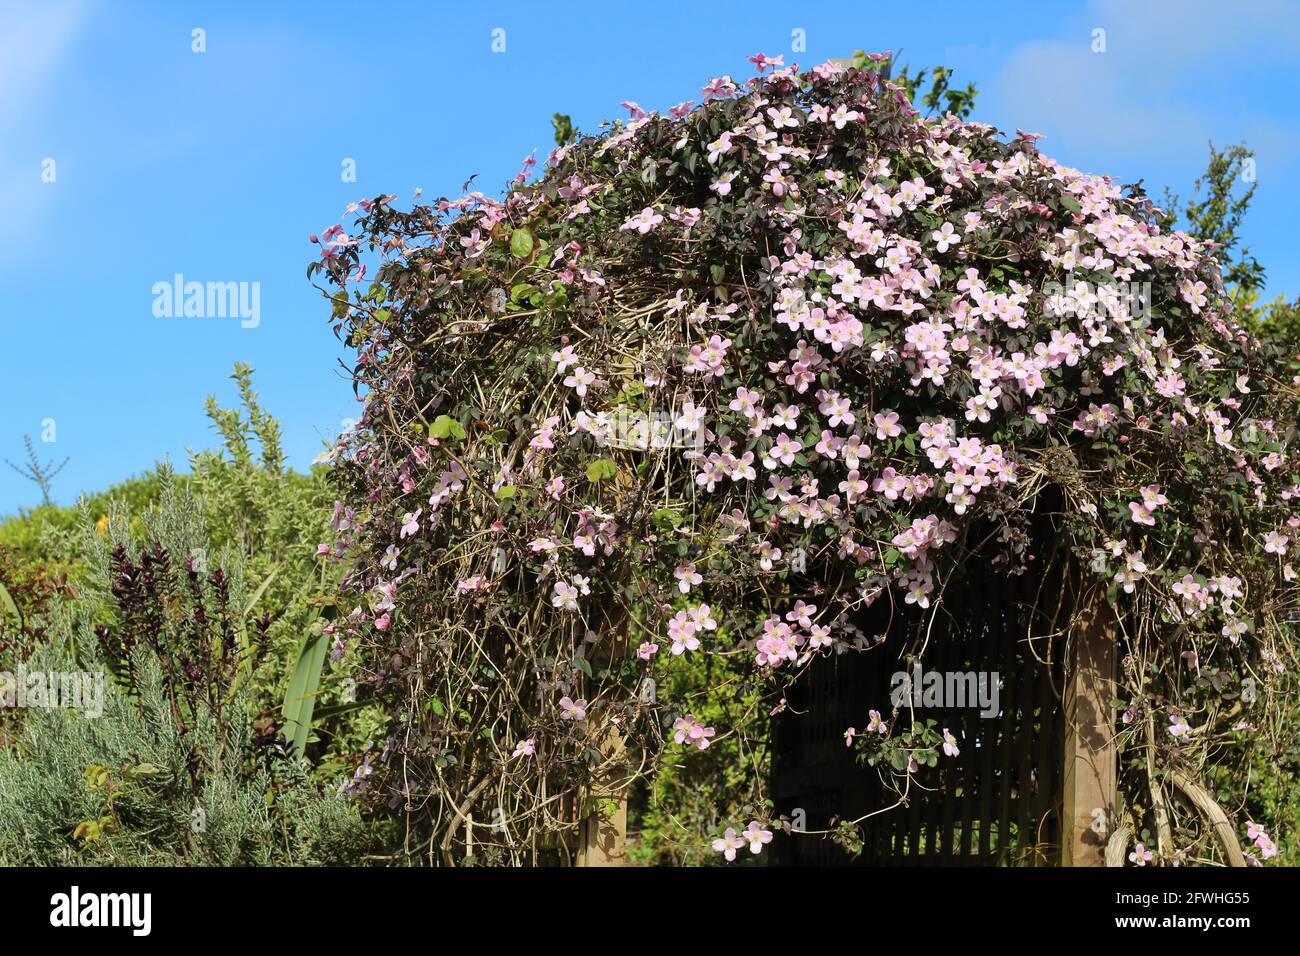 Clematis Montana flowers in bloom growing on trellis arch in garden against backdrop of blue sky Stock Photo